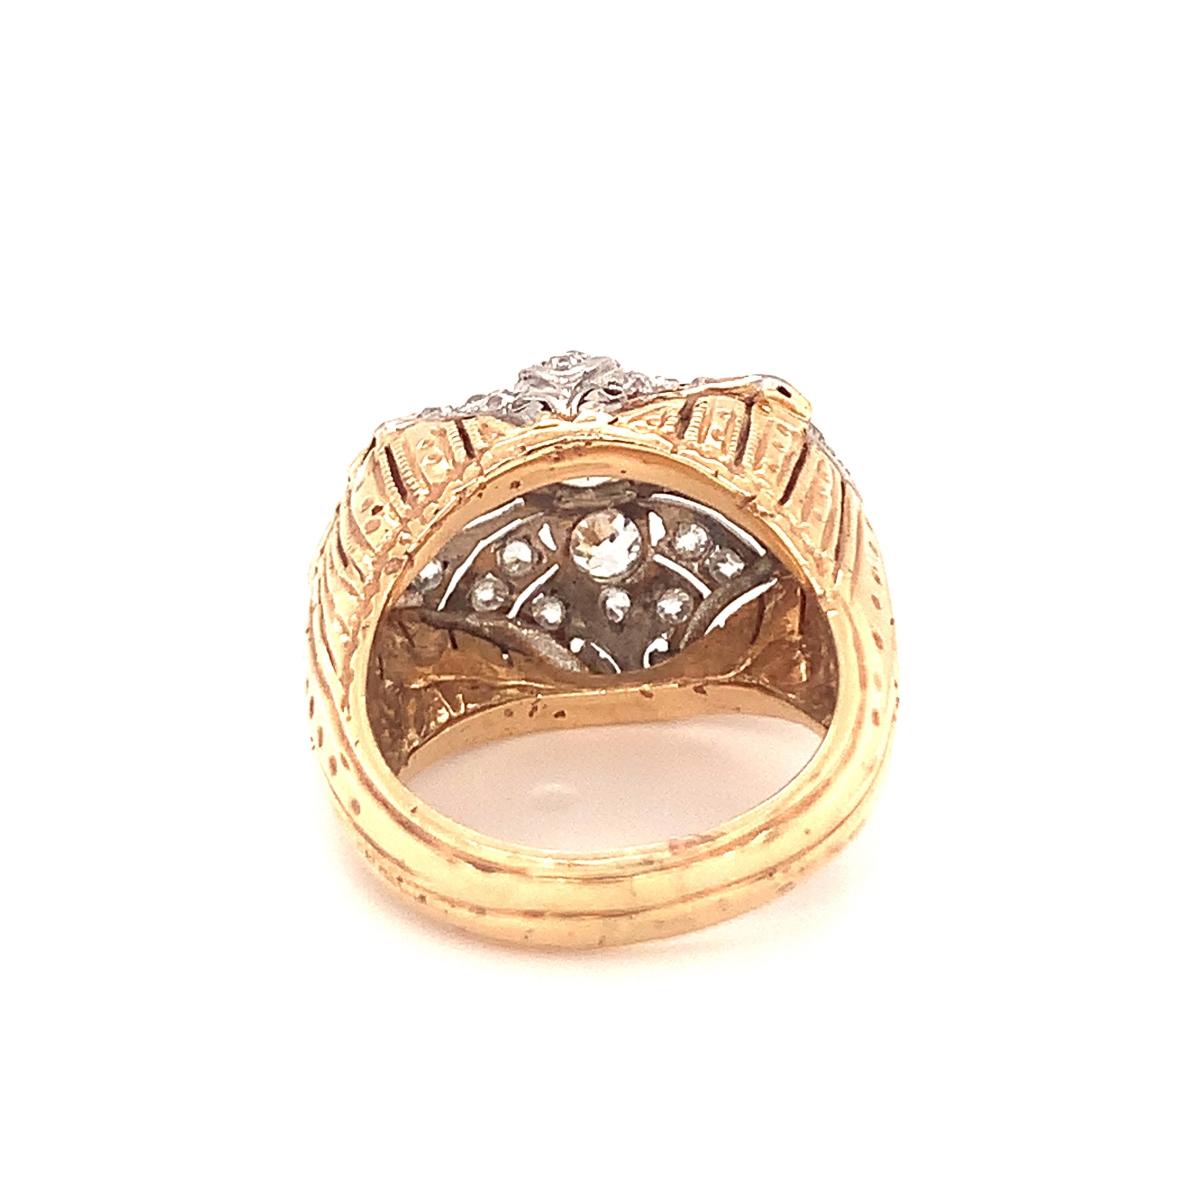 Vintage Diamond Platinum and 18K Yellow Gold Ring, circa 1960s For Sale 1